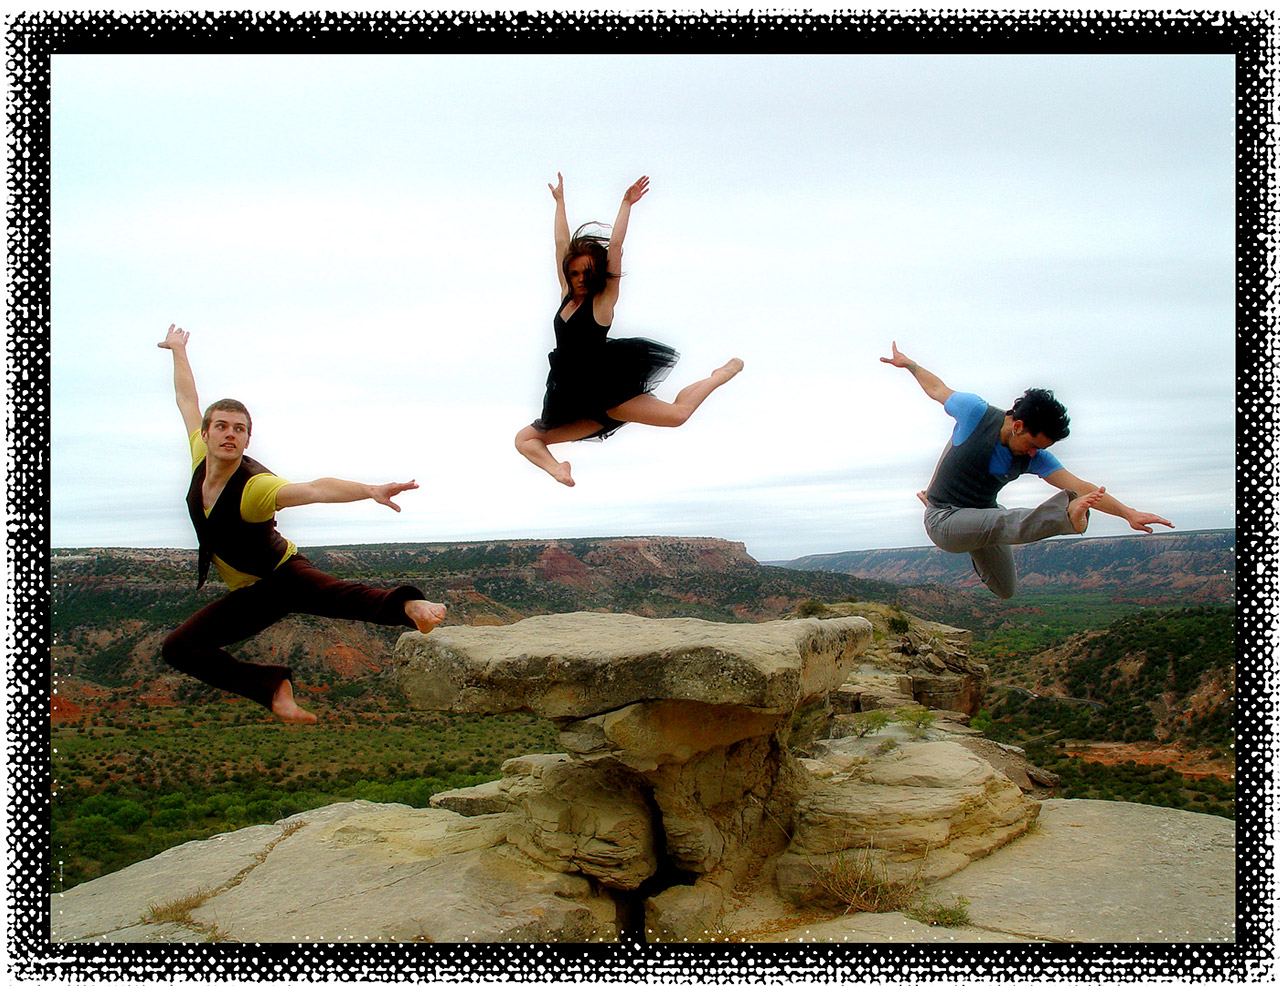 Three dancers in Palo Duro Canyon jumping off rock